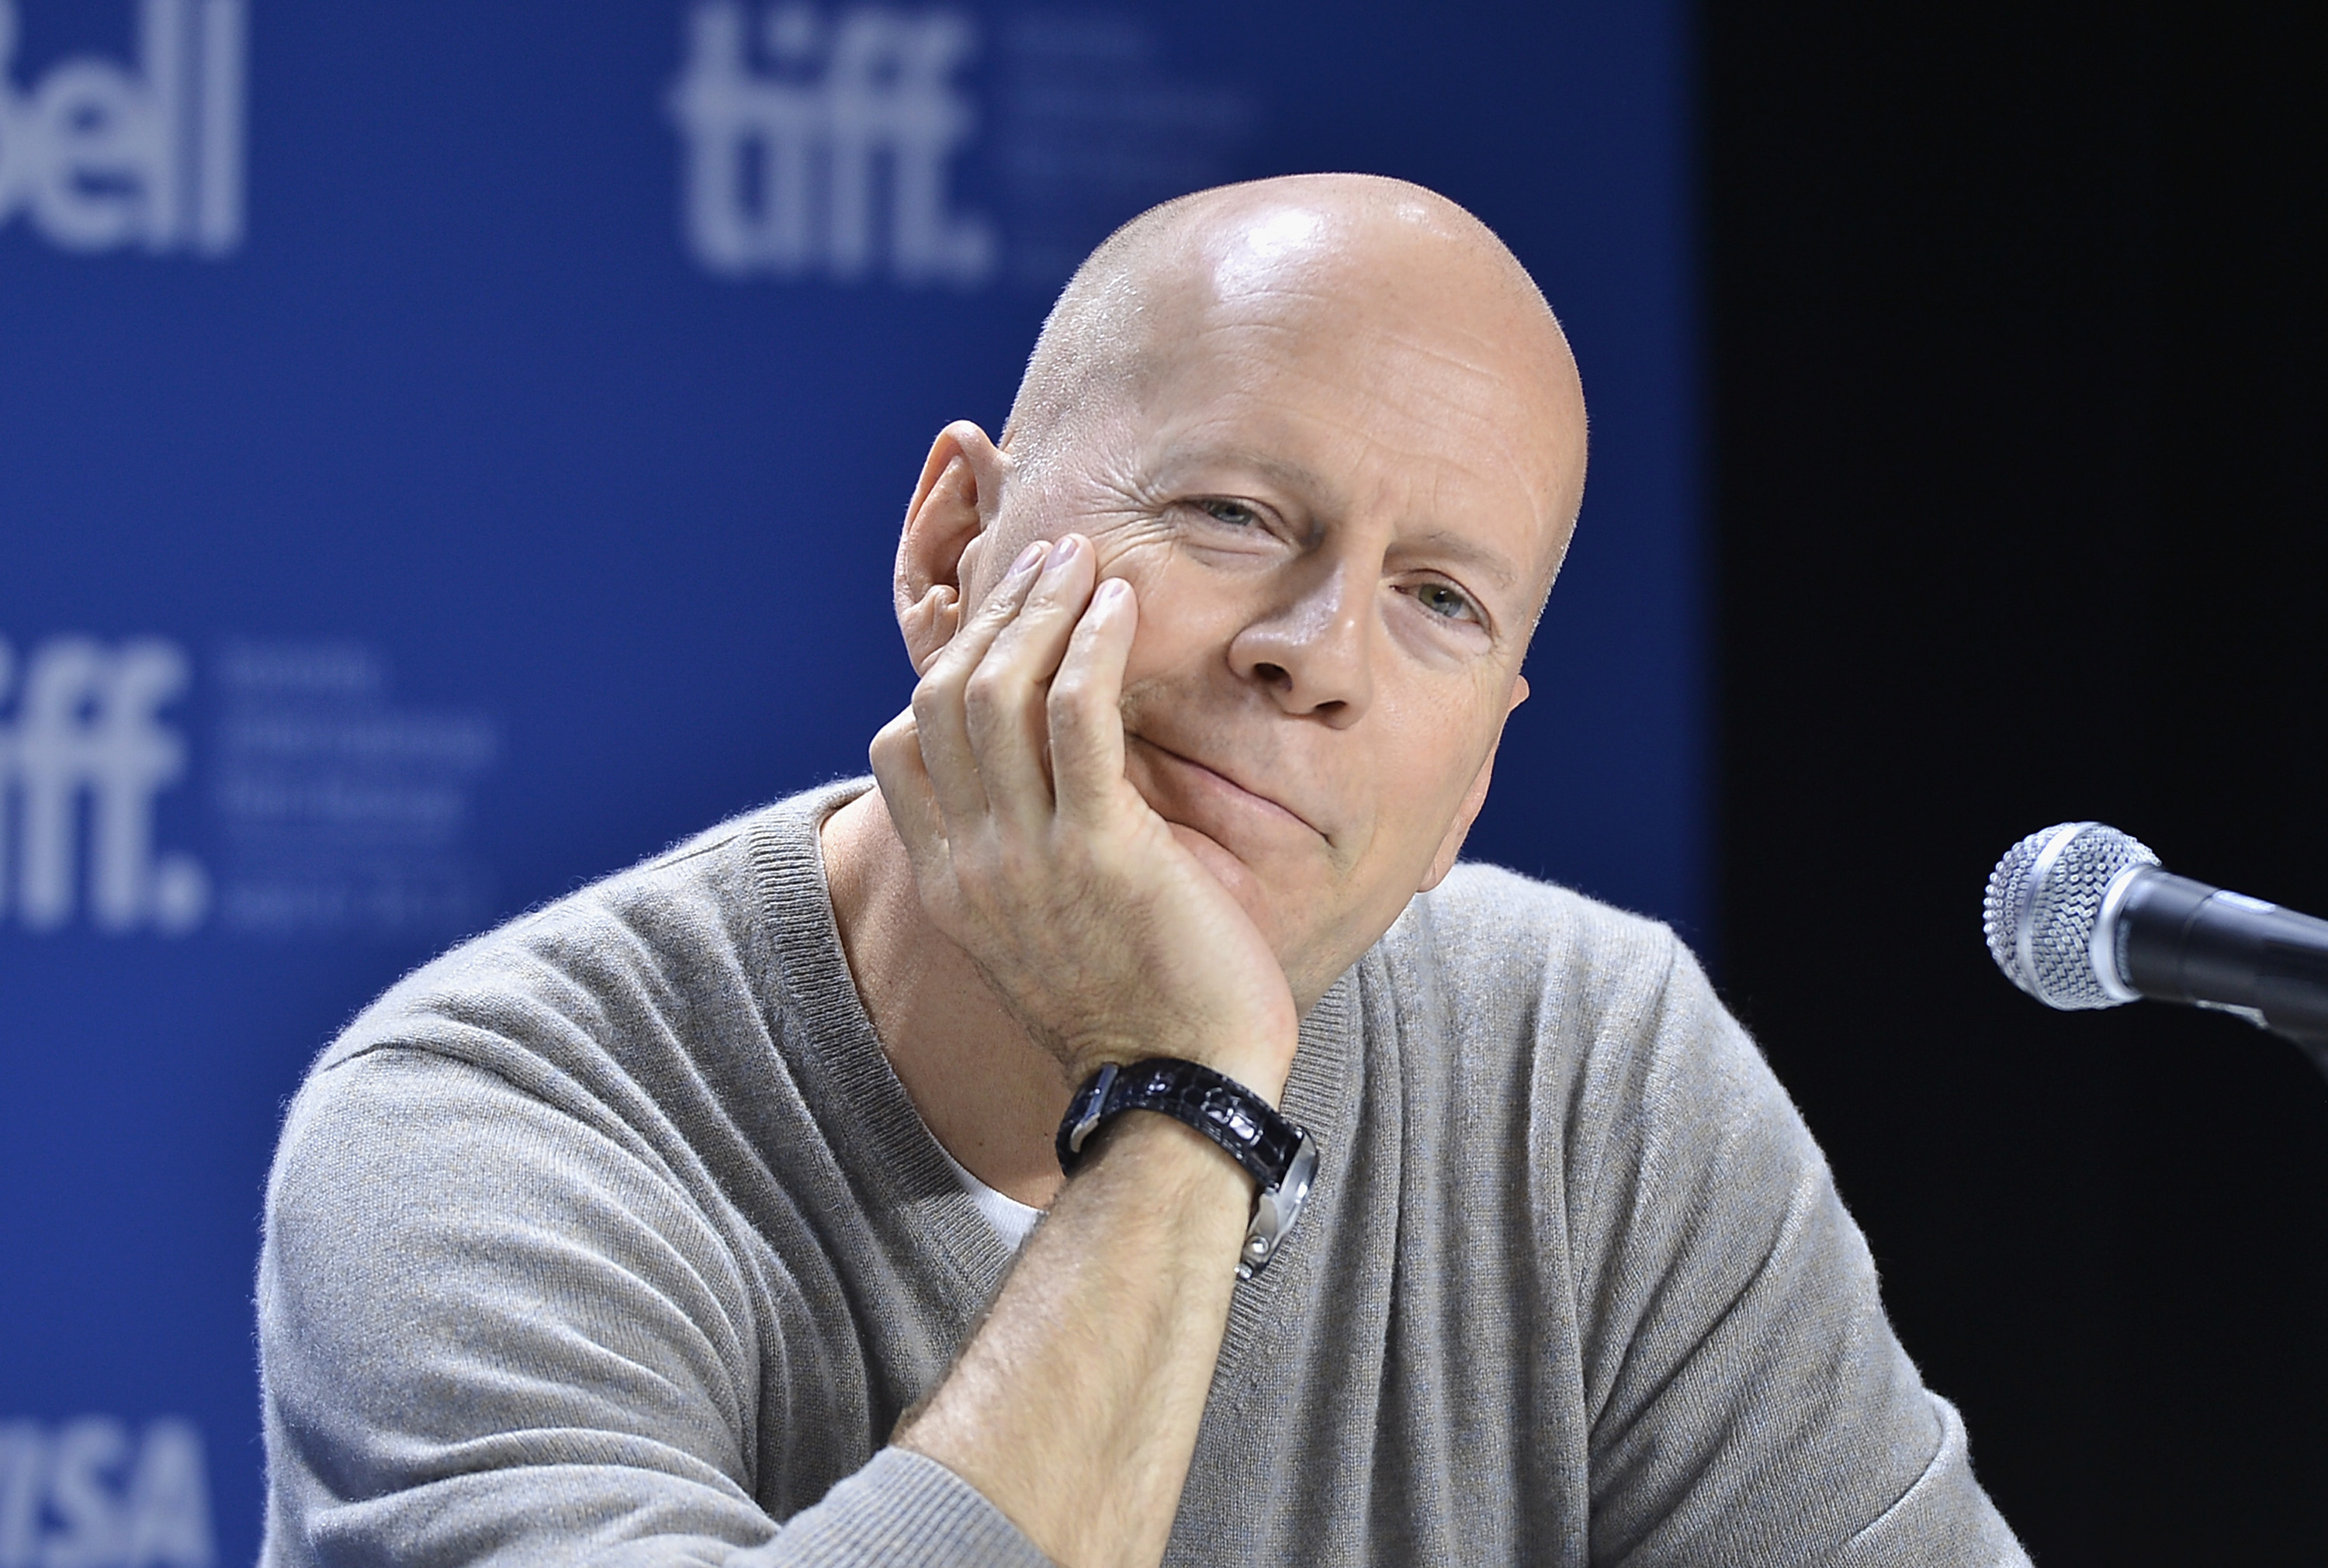 Bruce Willis attends the "Looper" press conference during the 2012 Toronto International Film Festival on September 6, 2012 in Toronto, Canada Source: Getty Images